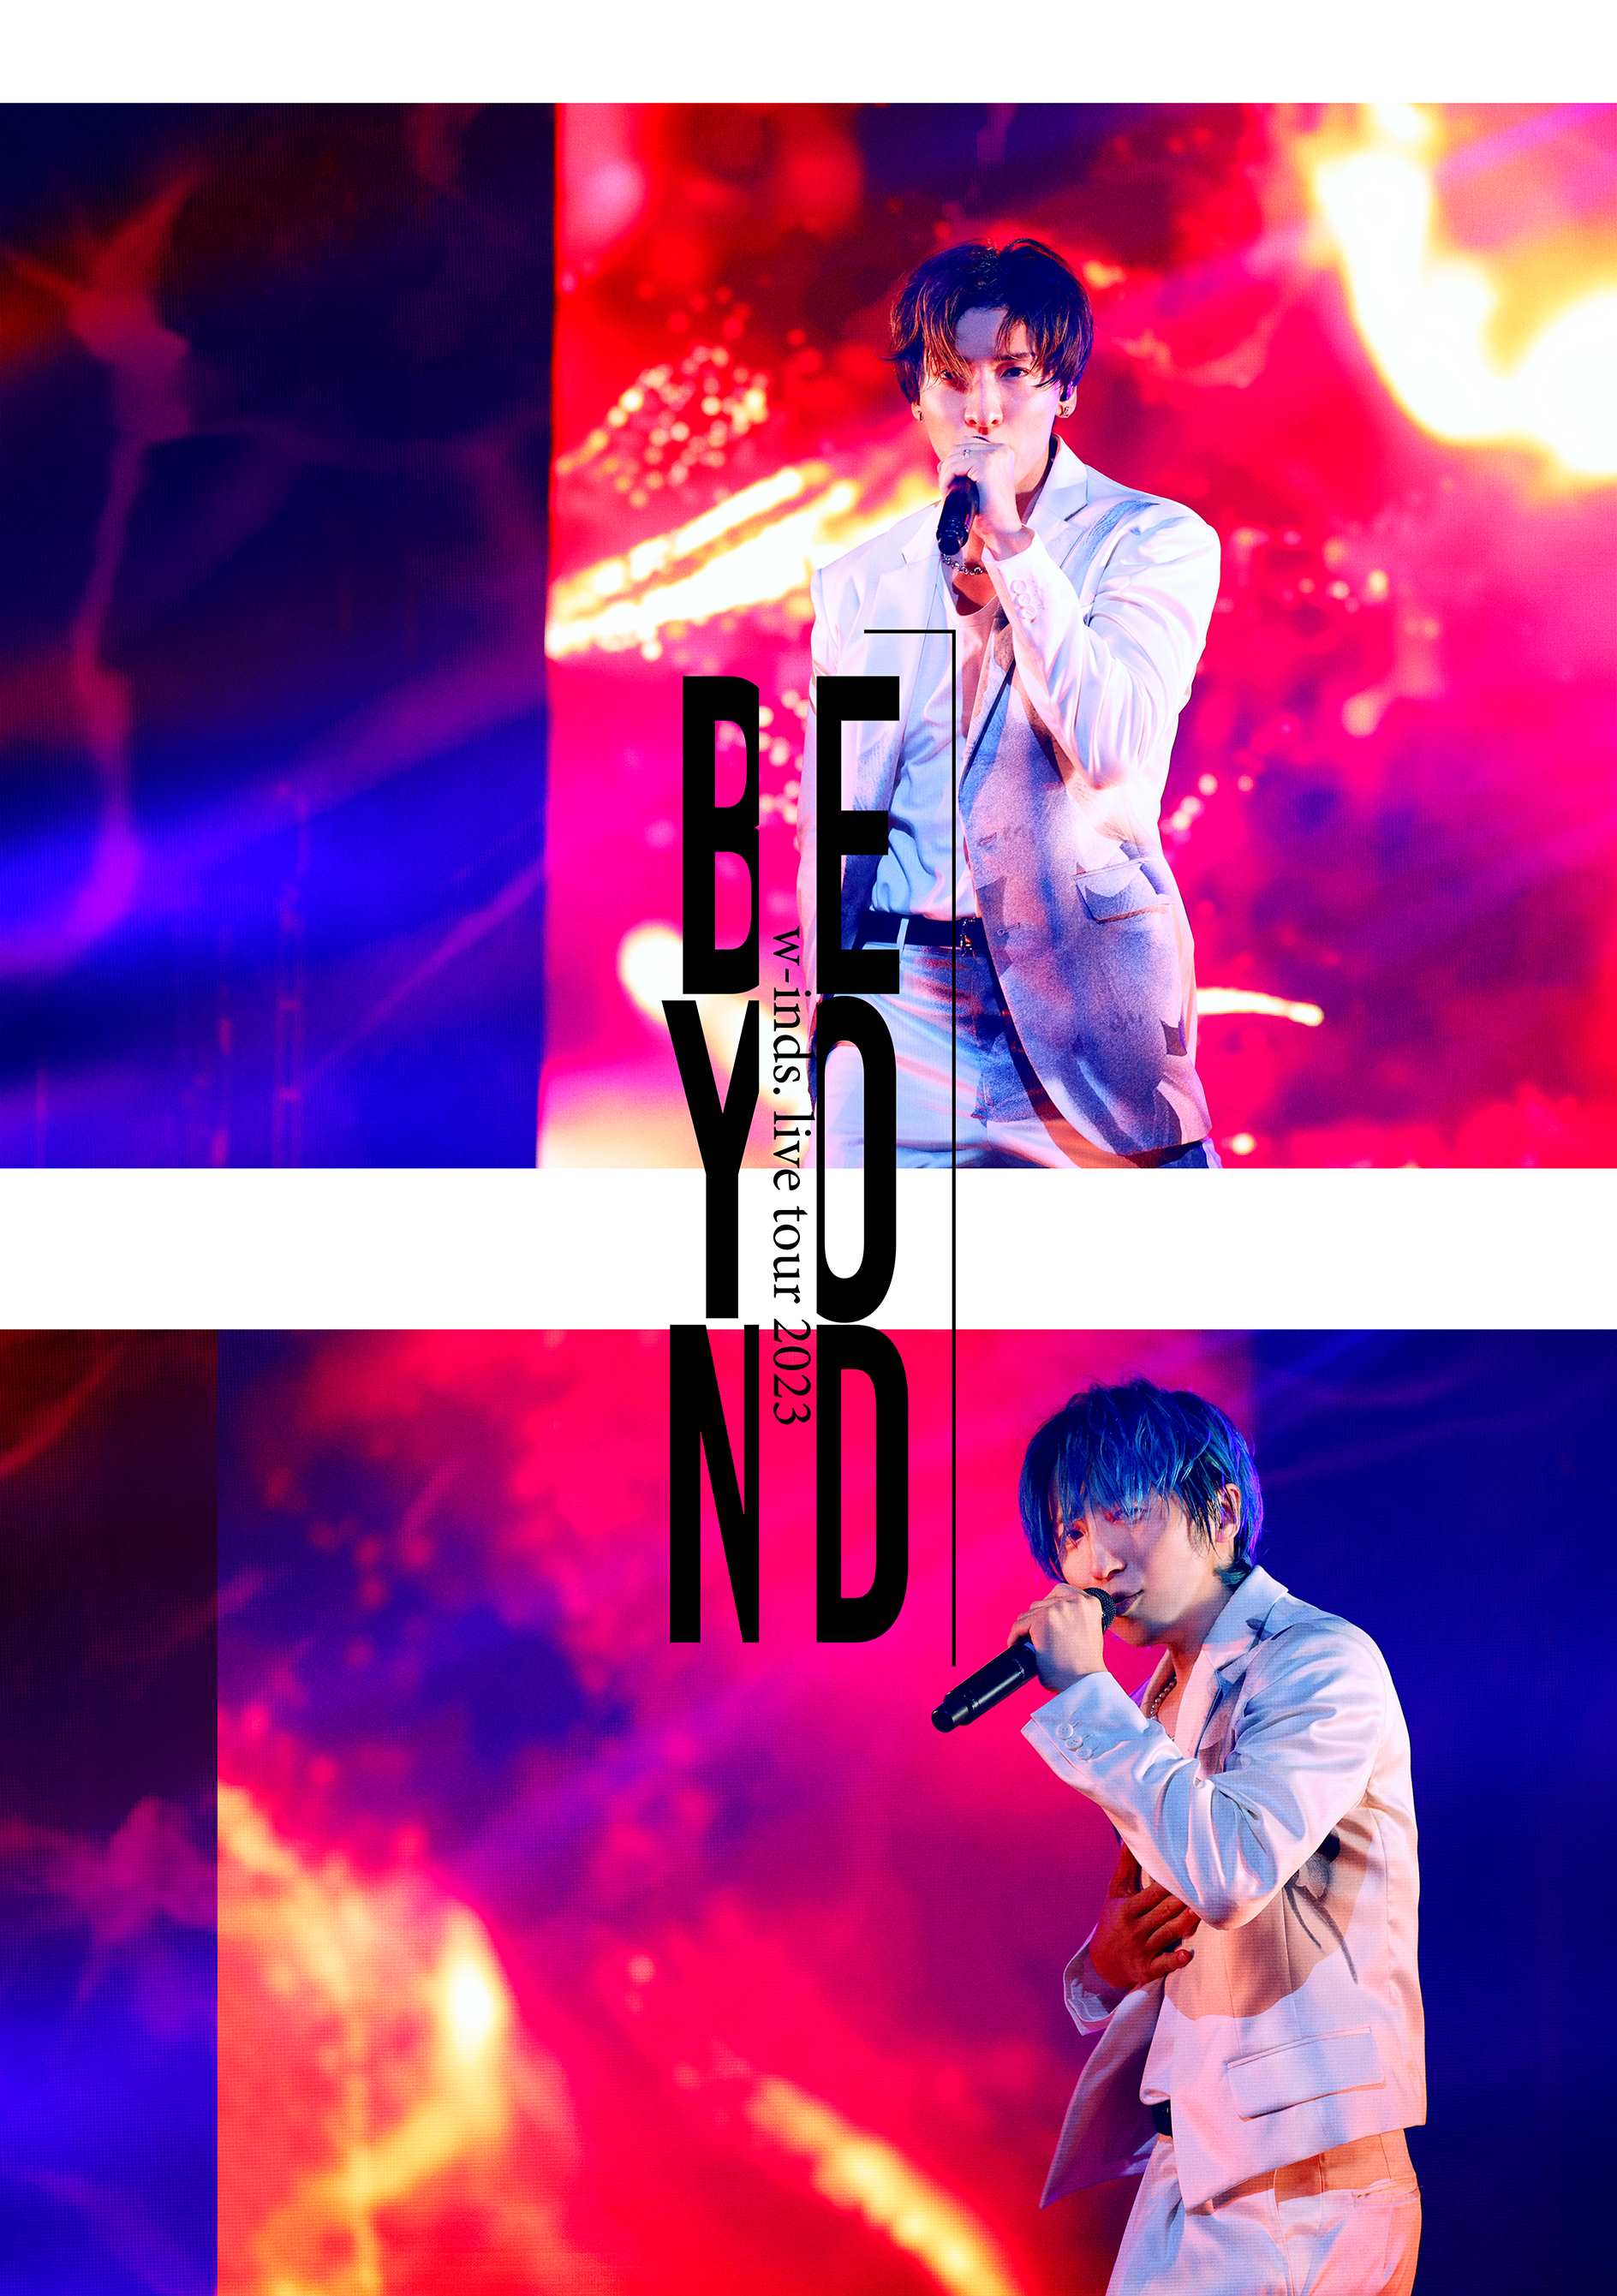 w-inds. LIVE TOUR 2023 “Beyond” Normal Edition [Blu-ray] Release 